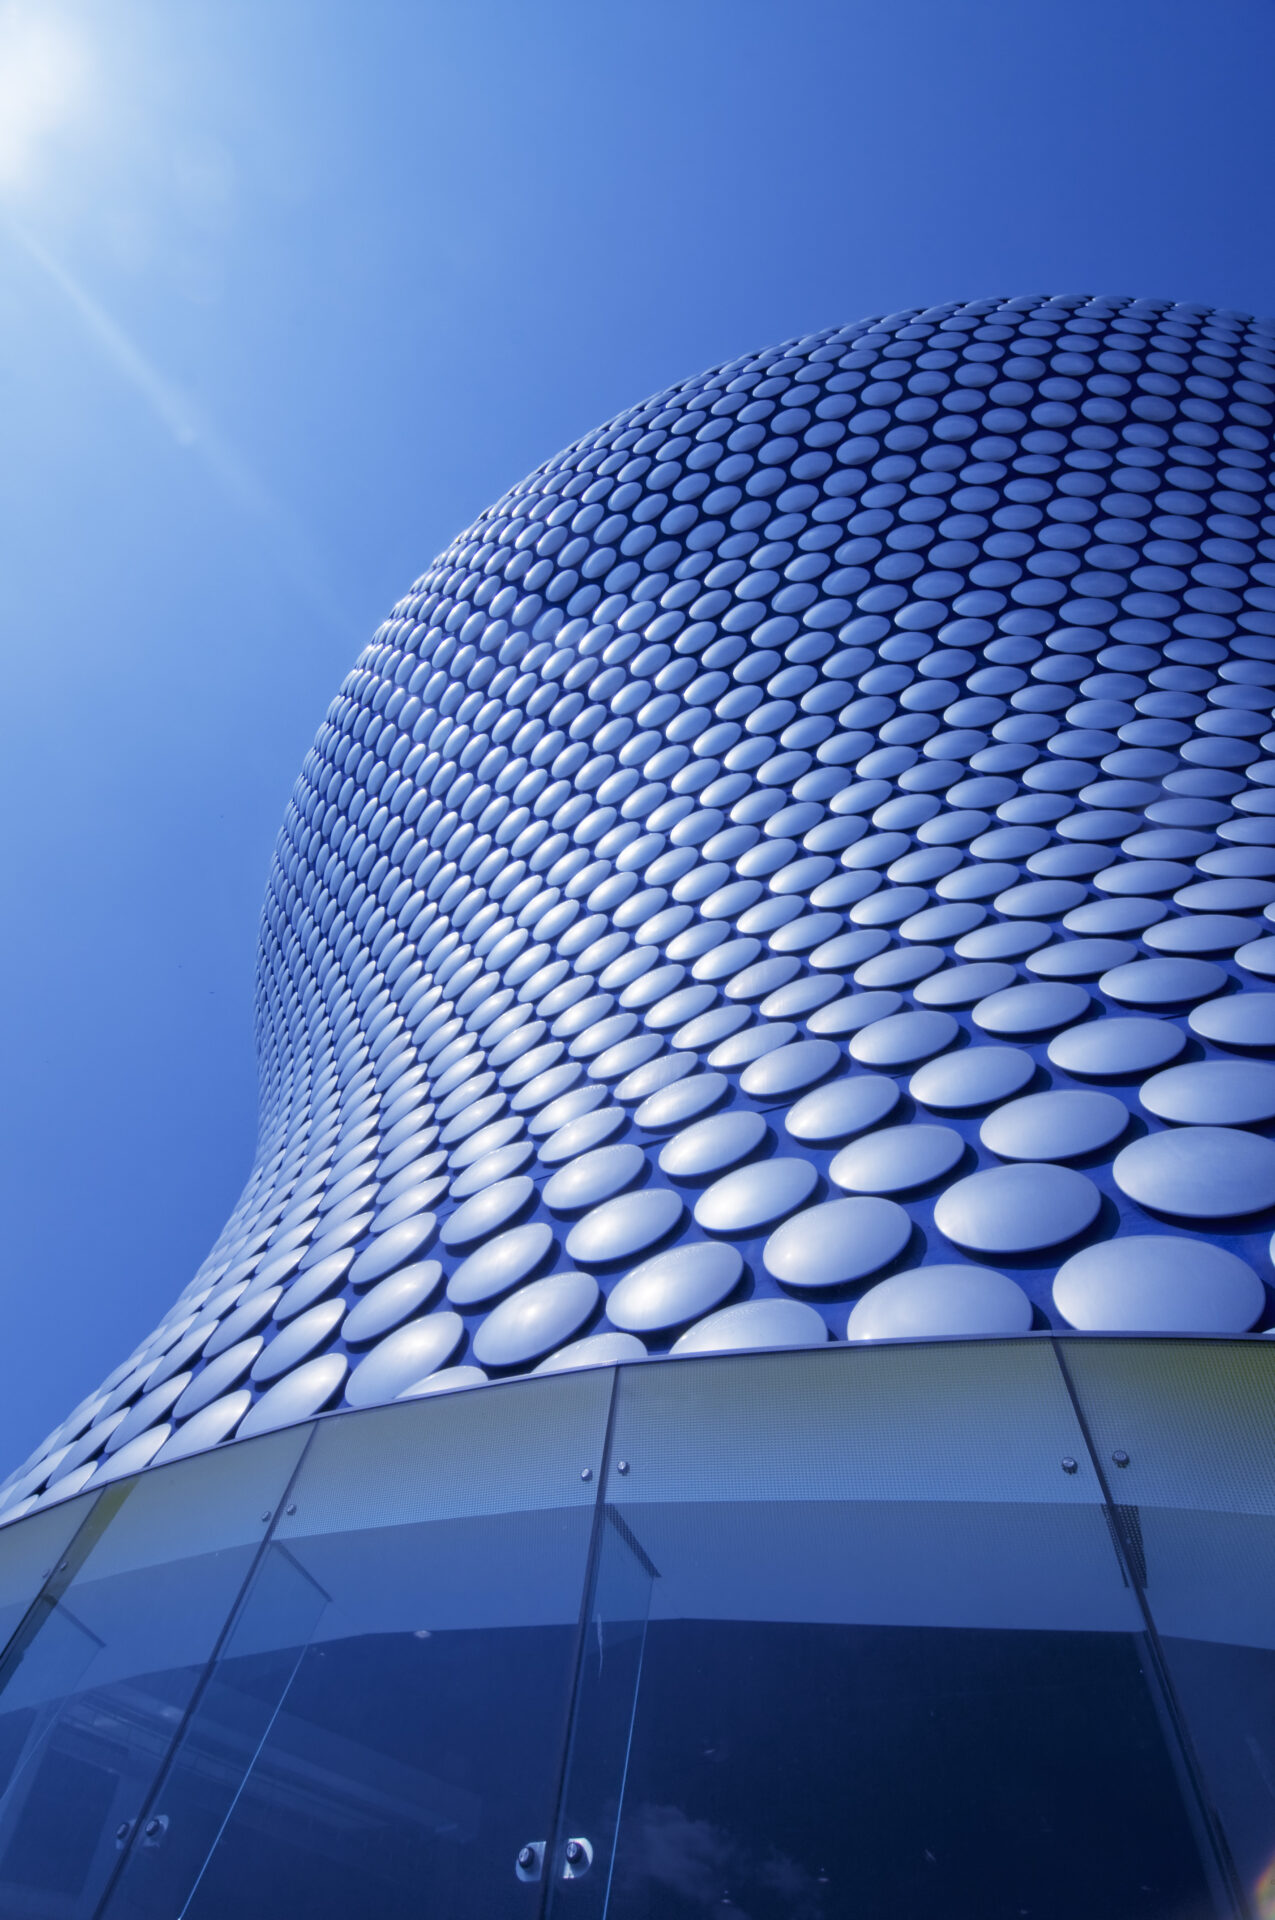 Modern,Sleek,Iconic,Architecture,Of,Giant,Store,Exterior,In,Birmingham,england